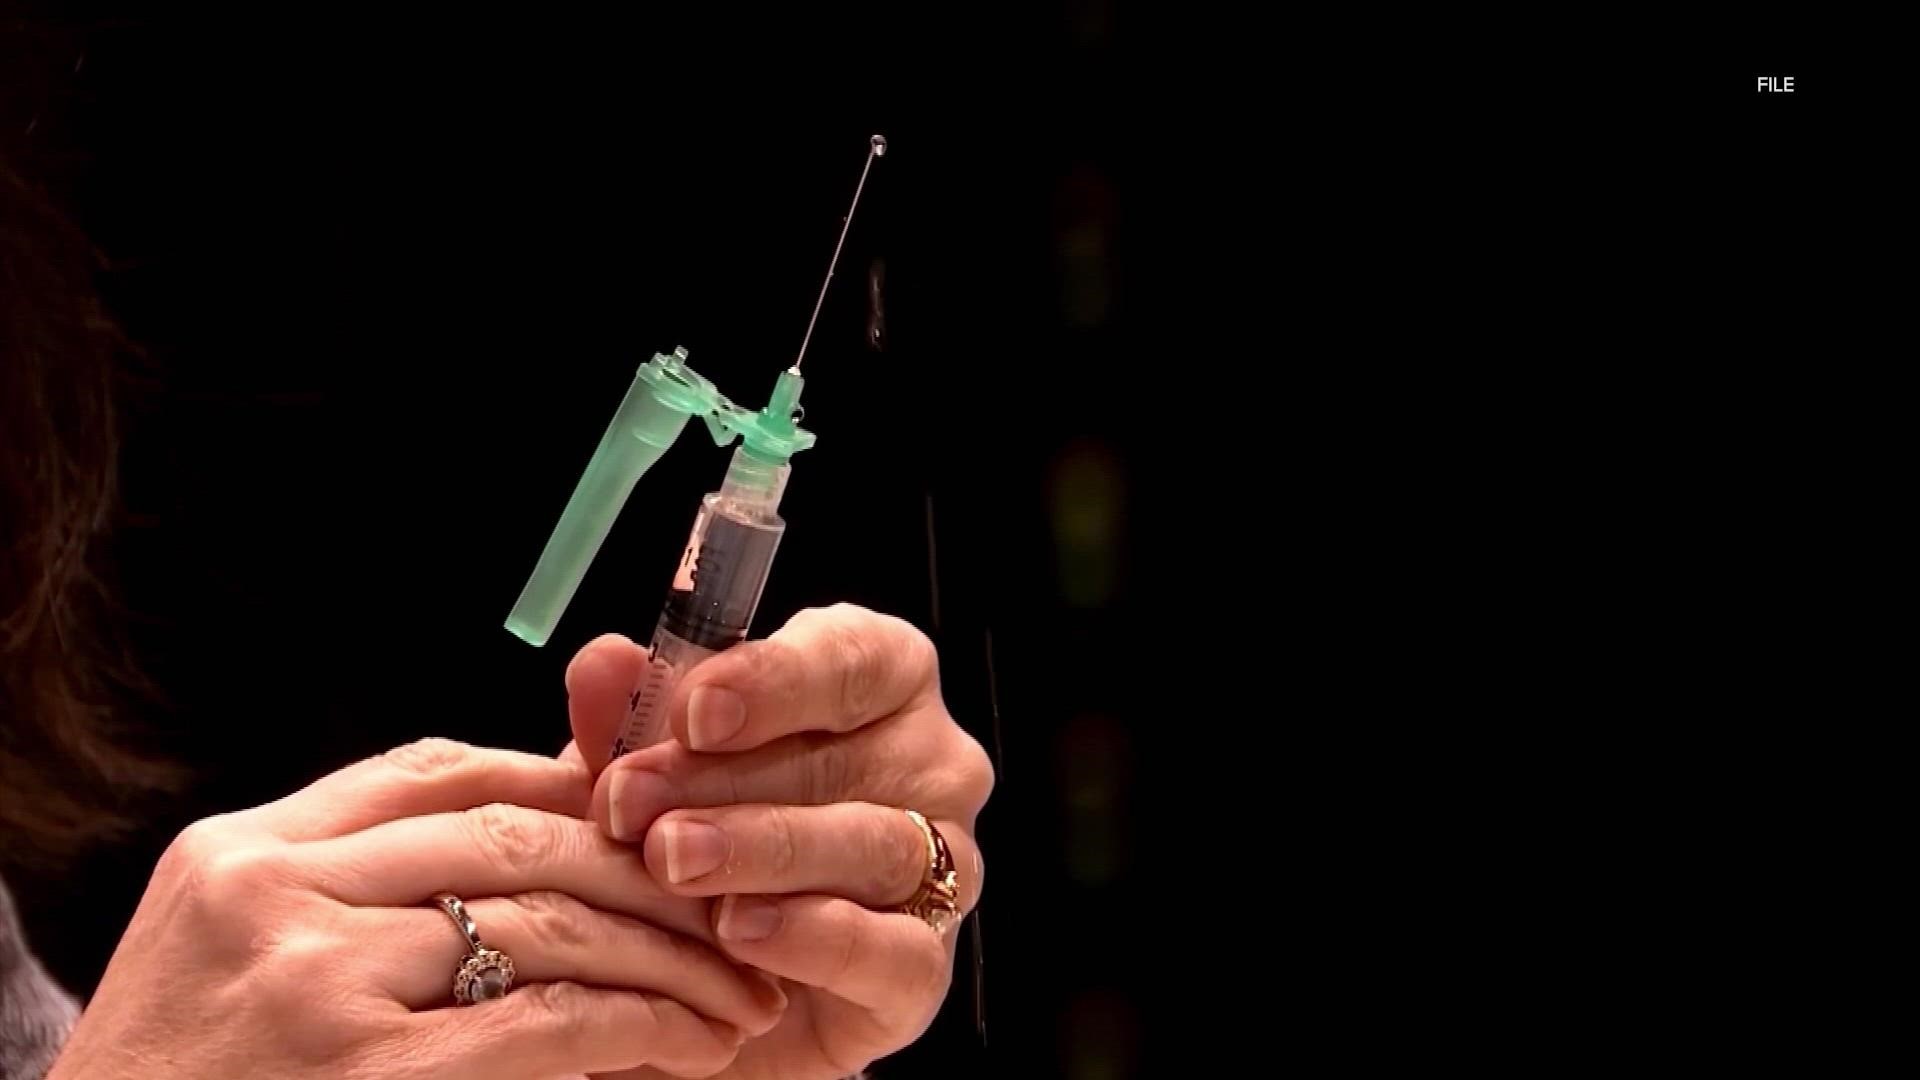 Health experts say there are no issues with getting both the flu shot and the COVID-19 vaccine at the same time because they don't interfere with each other.